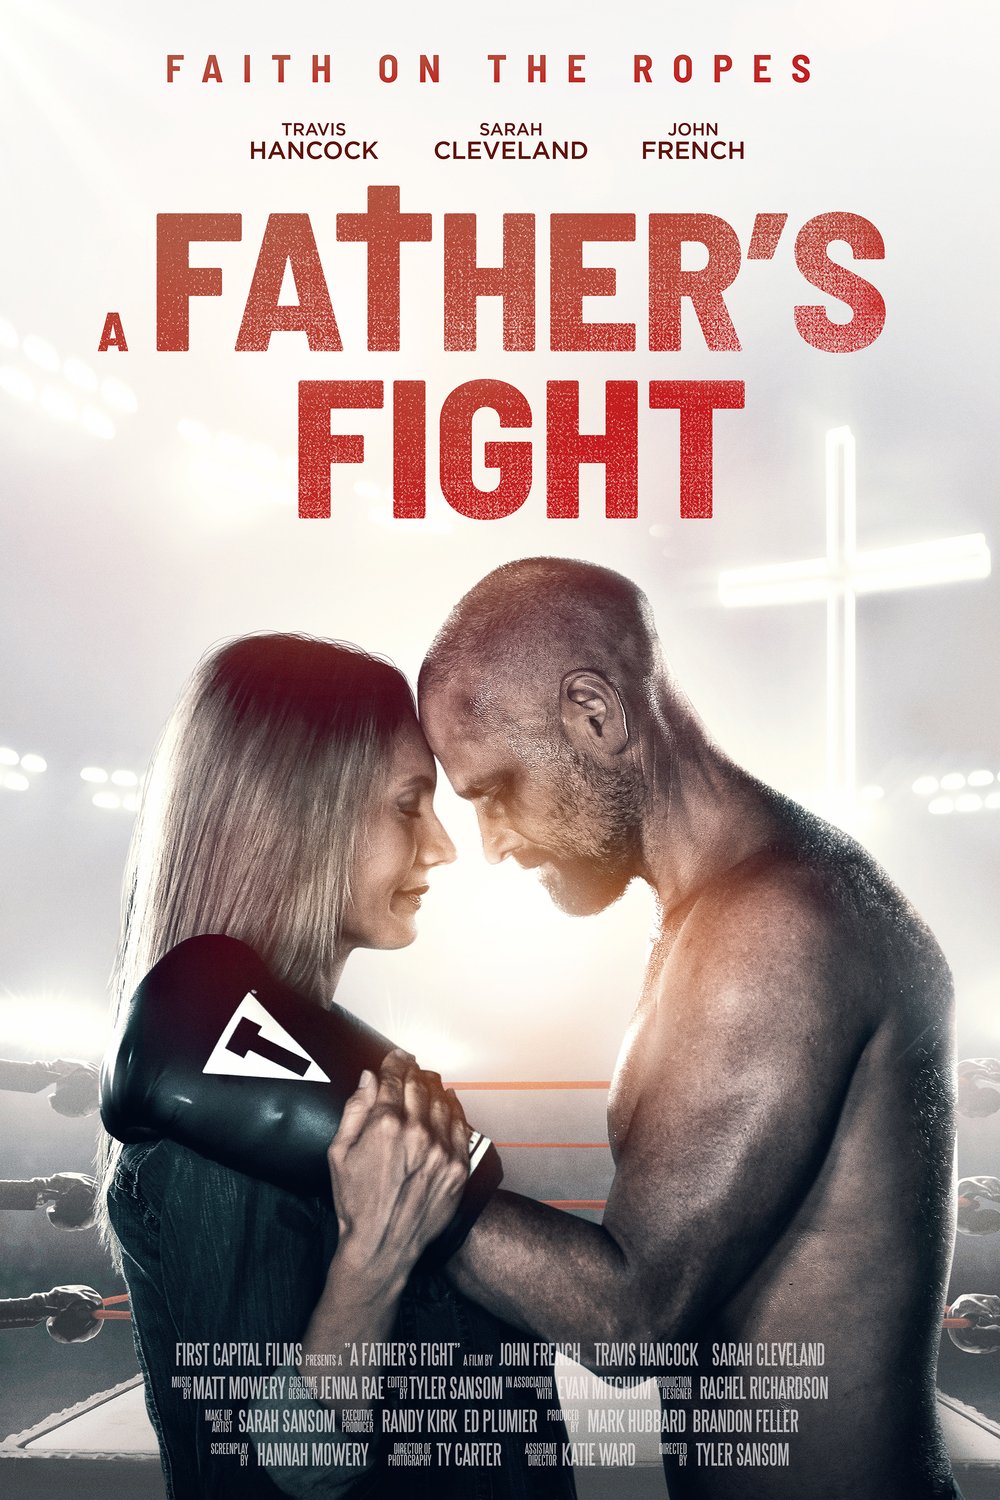 Poster of the movie A Father's Fight